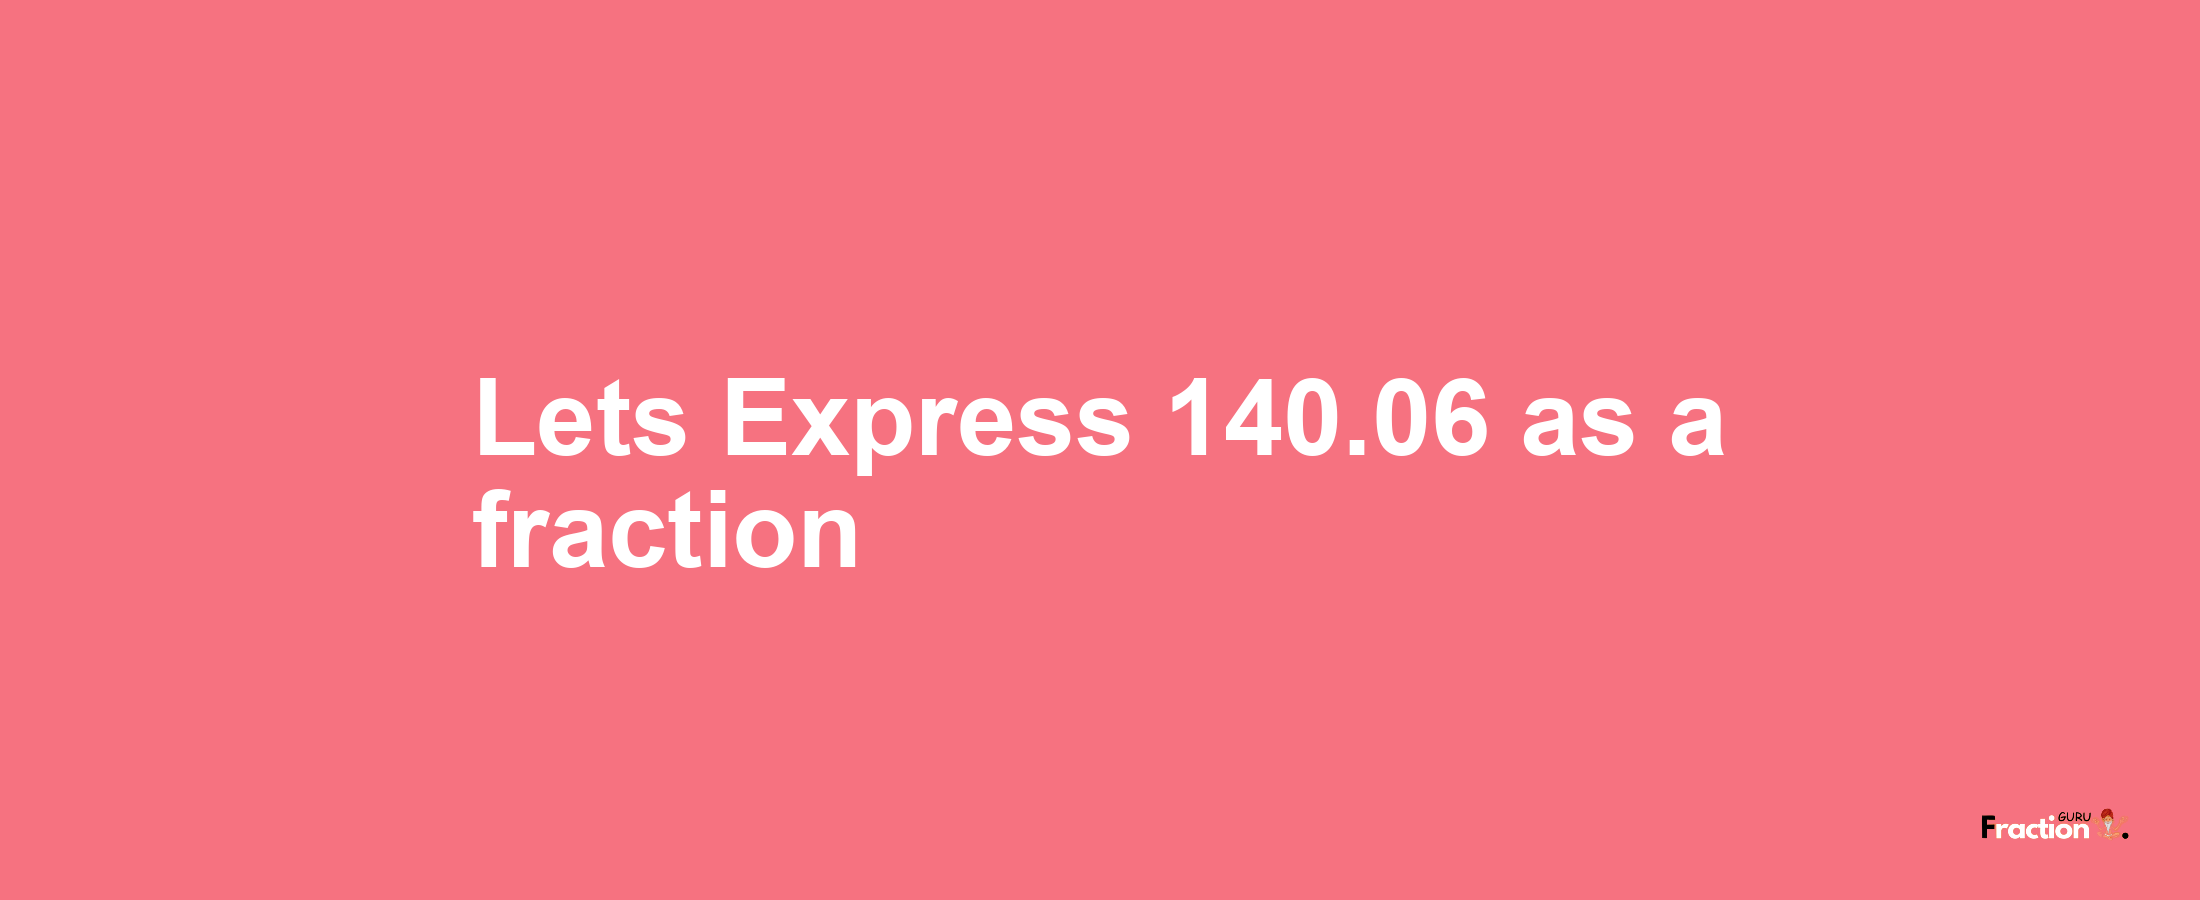 Lets Express 140.06 as afraction